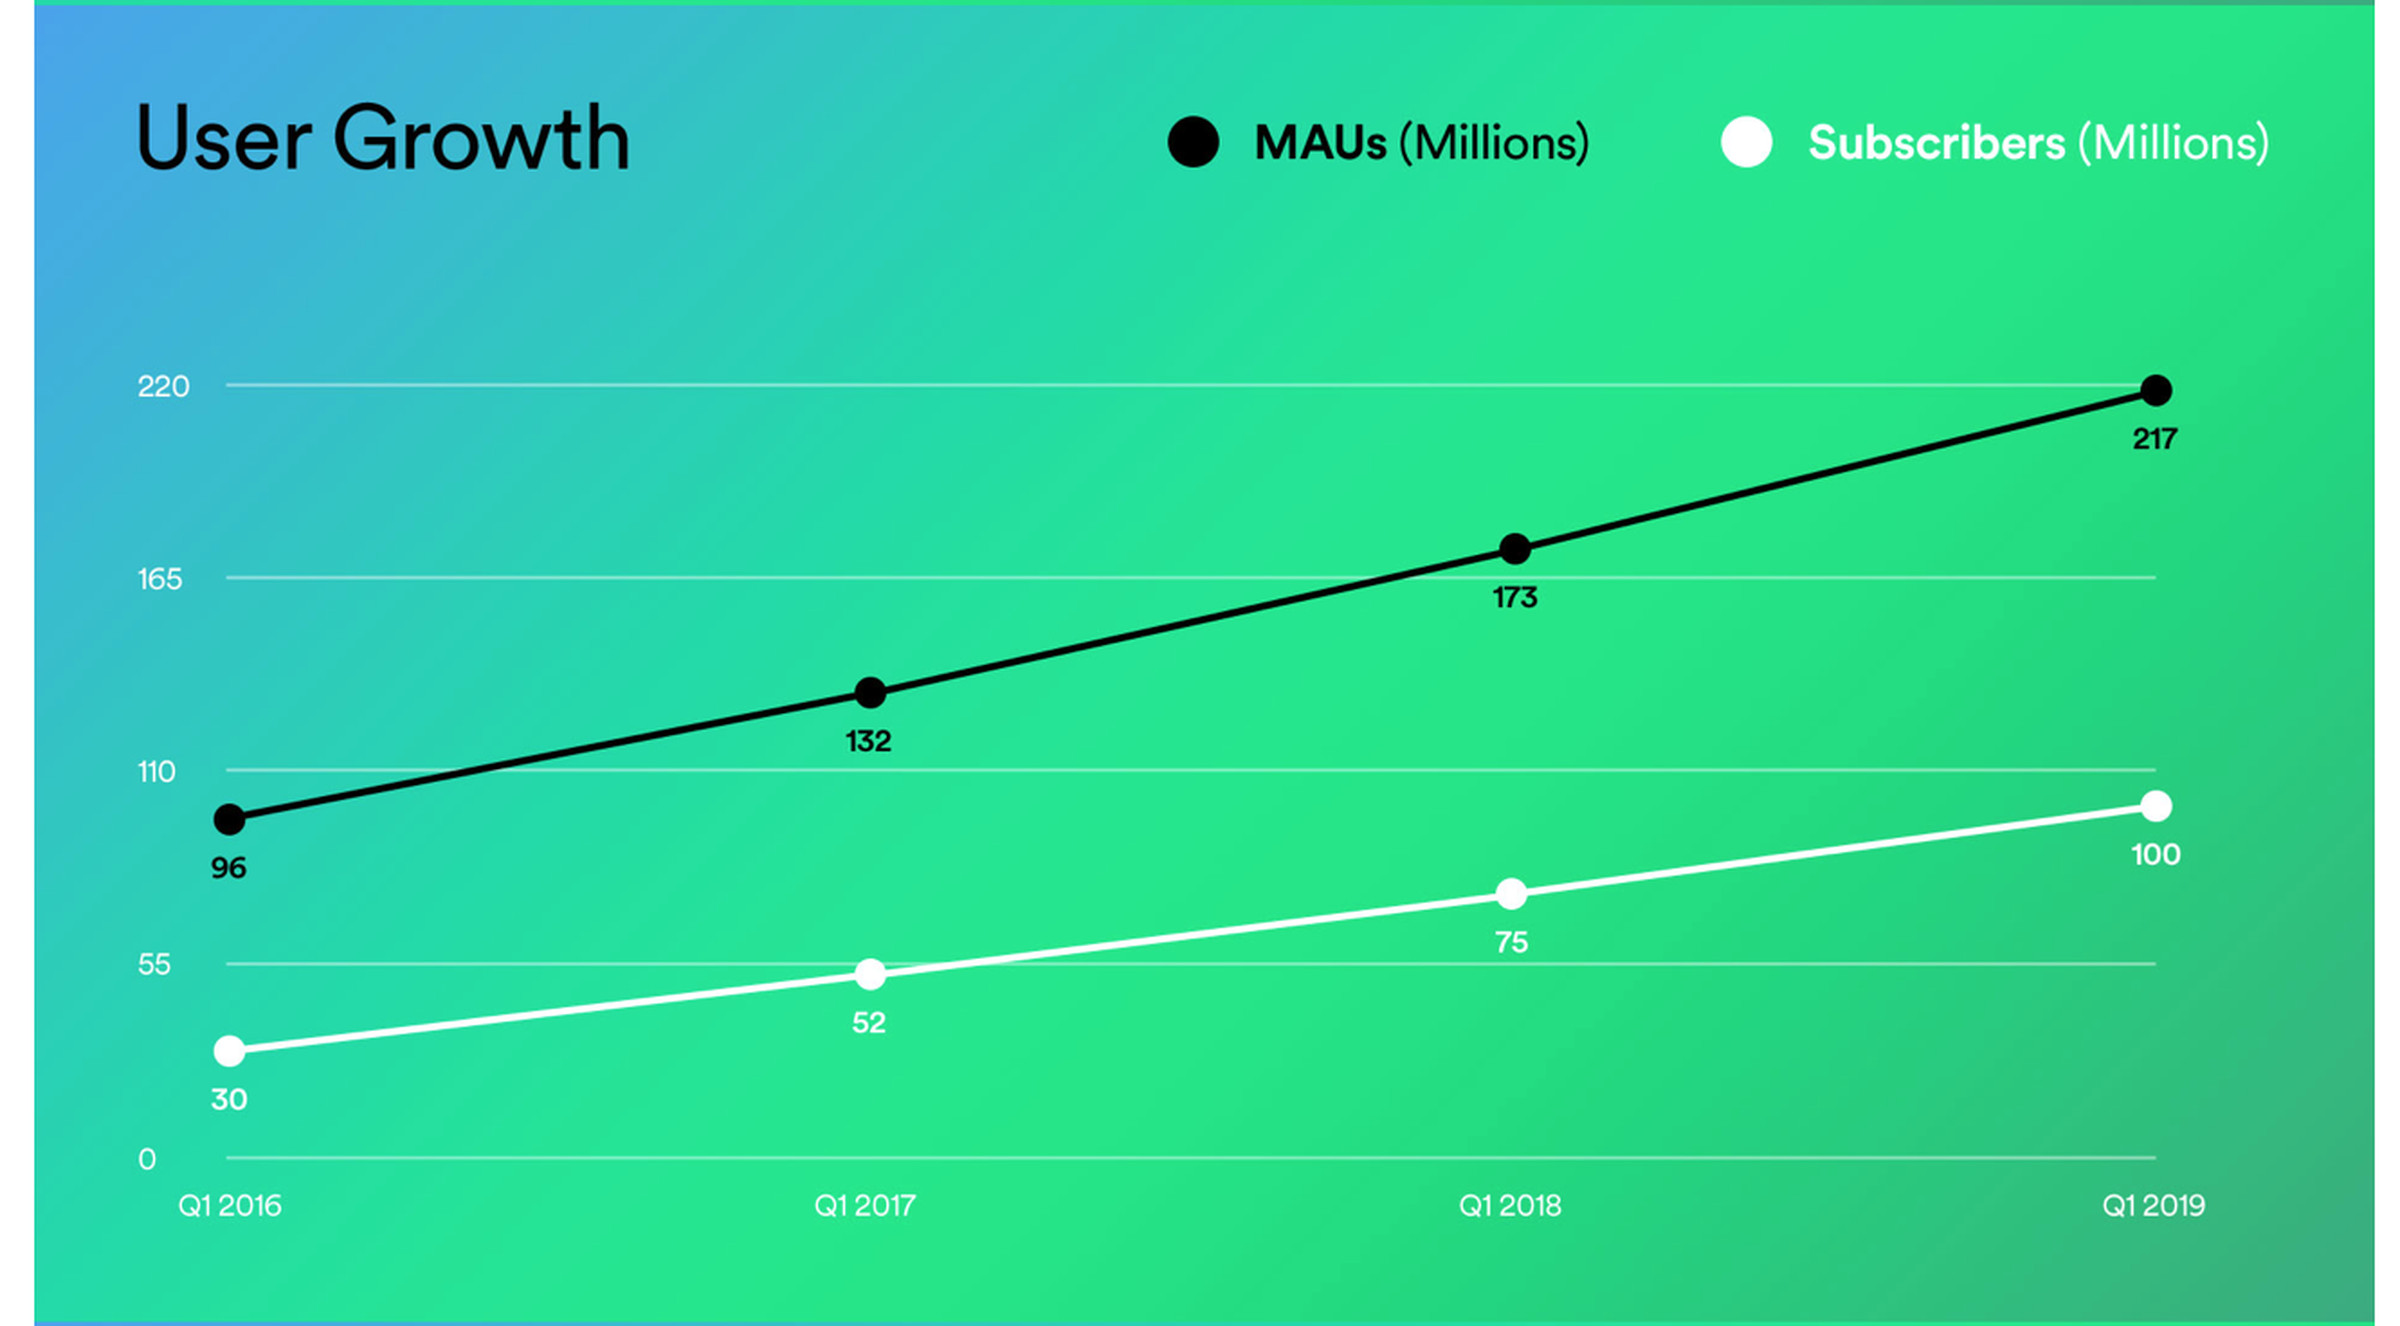 Spotify now has 100 million paid subscribers and 217 million monthly active users in total.